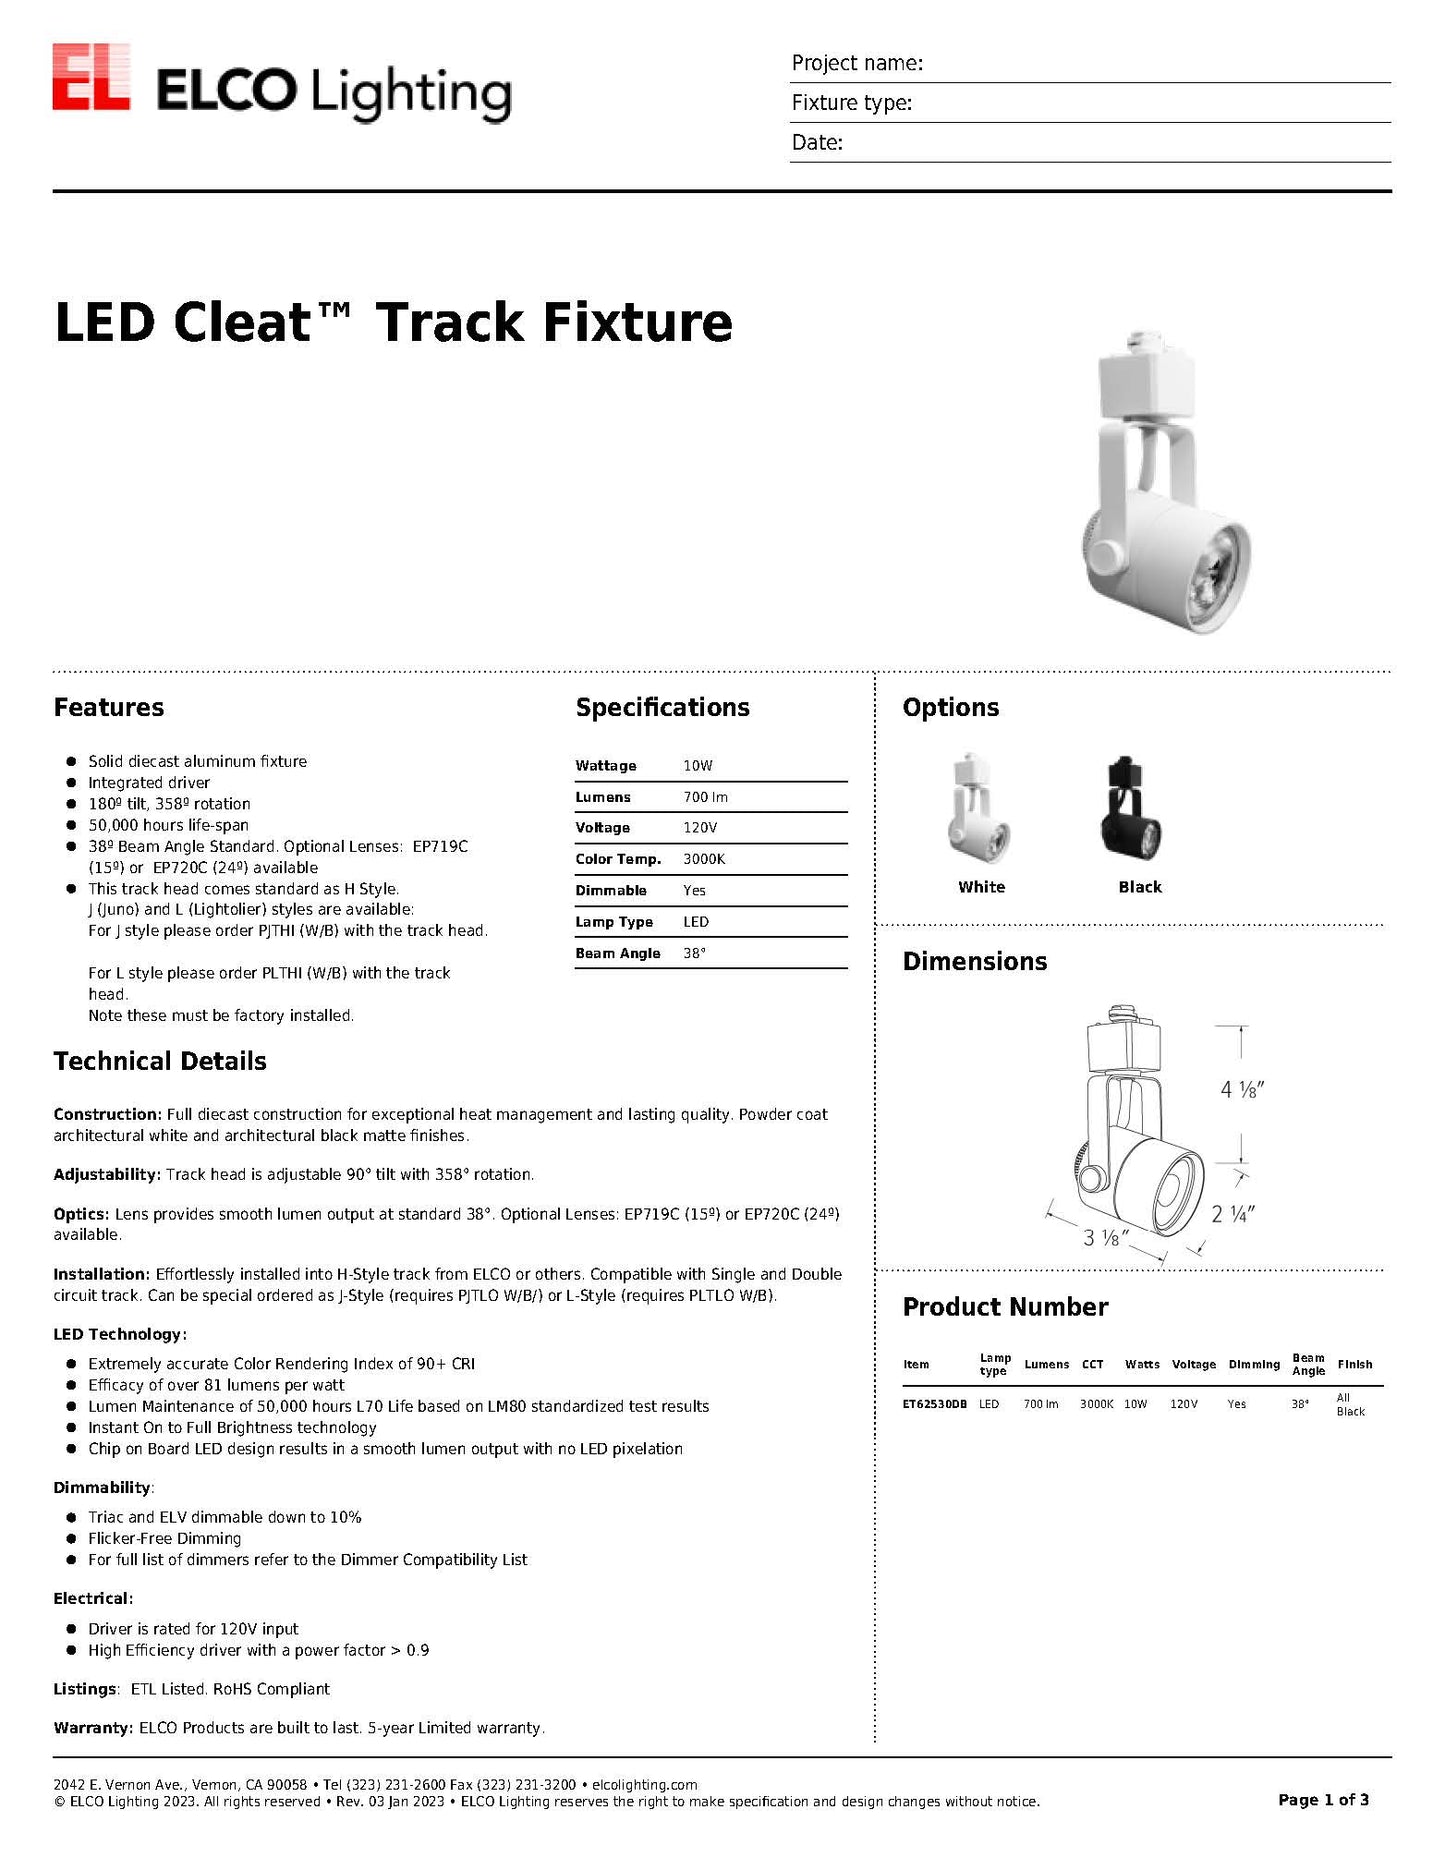 LED Cleat Track Fixture